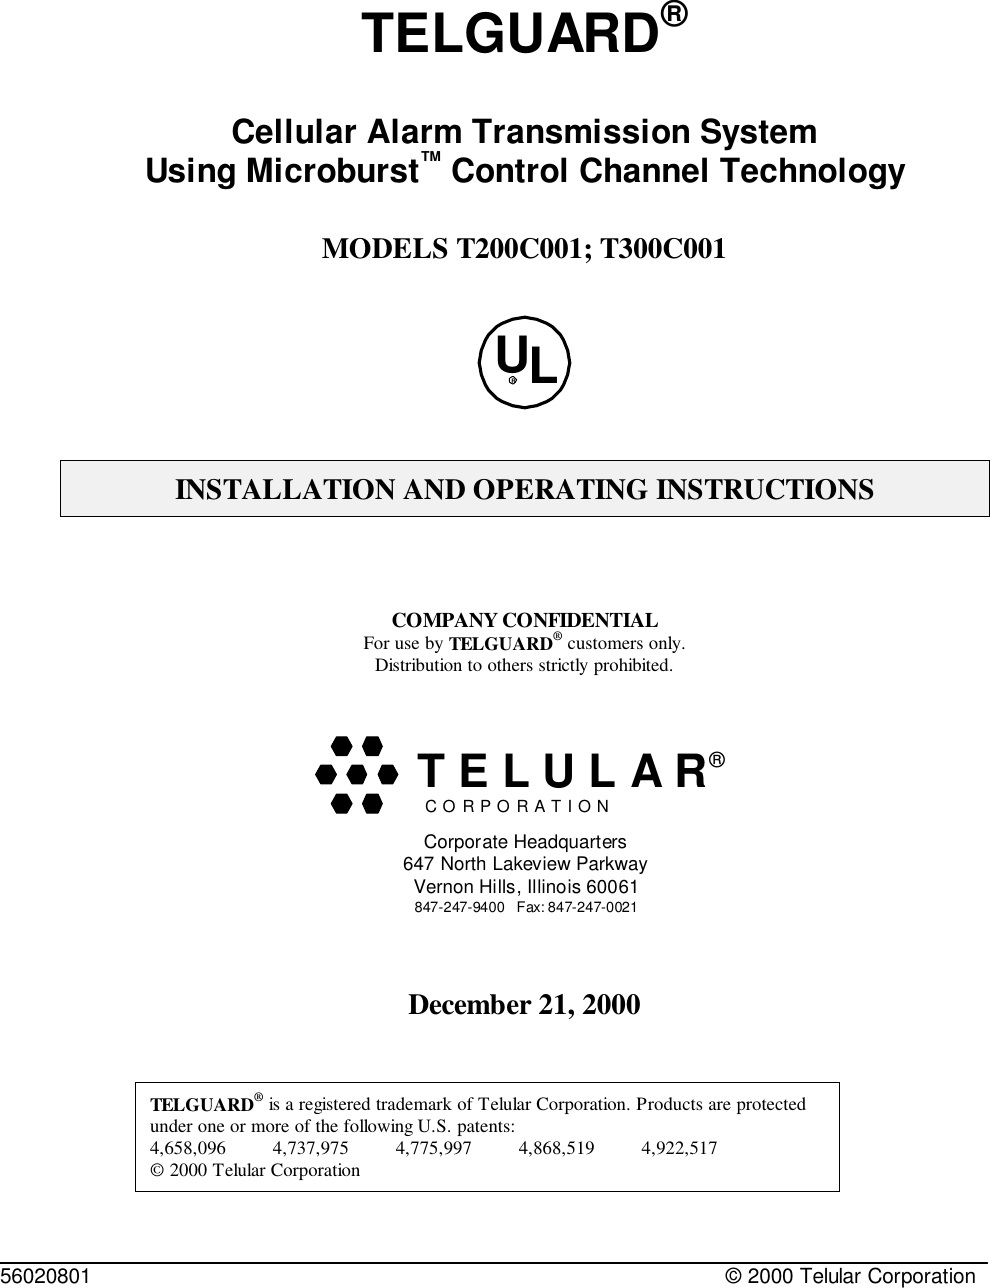 56020801 © 2000 Telular CorporationTELGUARD®Cellular Alarm Transmission SystemUsing Microburst™ Control Channel TechnologyMODELS T200C001; T300C001ULRINSTALLATION AND OPERATING INSTRUCTIONSCOMPANY CONFIDENTIALFor use by TELGUARD® customers only.Distribution to others strictly prohibited.December 21, 2000TELGUARD® is a registered trademark of Telular Corporation. Products are protectedunder one or more of the following U.S. patents:             4,658,096         4,737,975         4,775,997         4,868,519         4,922,517       © 2000 Telular CorporationC O R P O R A T I O N®Corporate Headquarters647 North Lakeview ParkwayVernon Hills, Illinois 60061847-247-9400   Fax: 847-247-0021  T E L U L A R